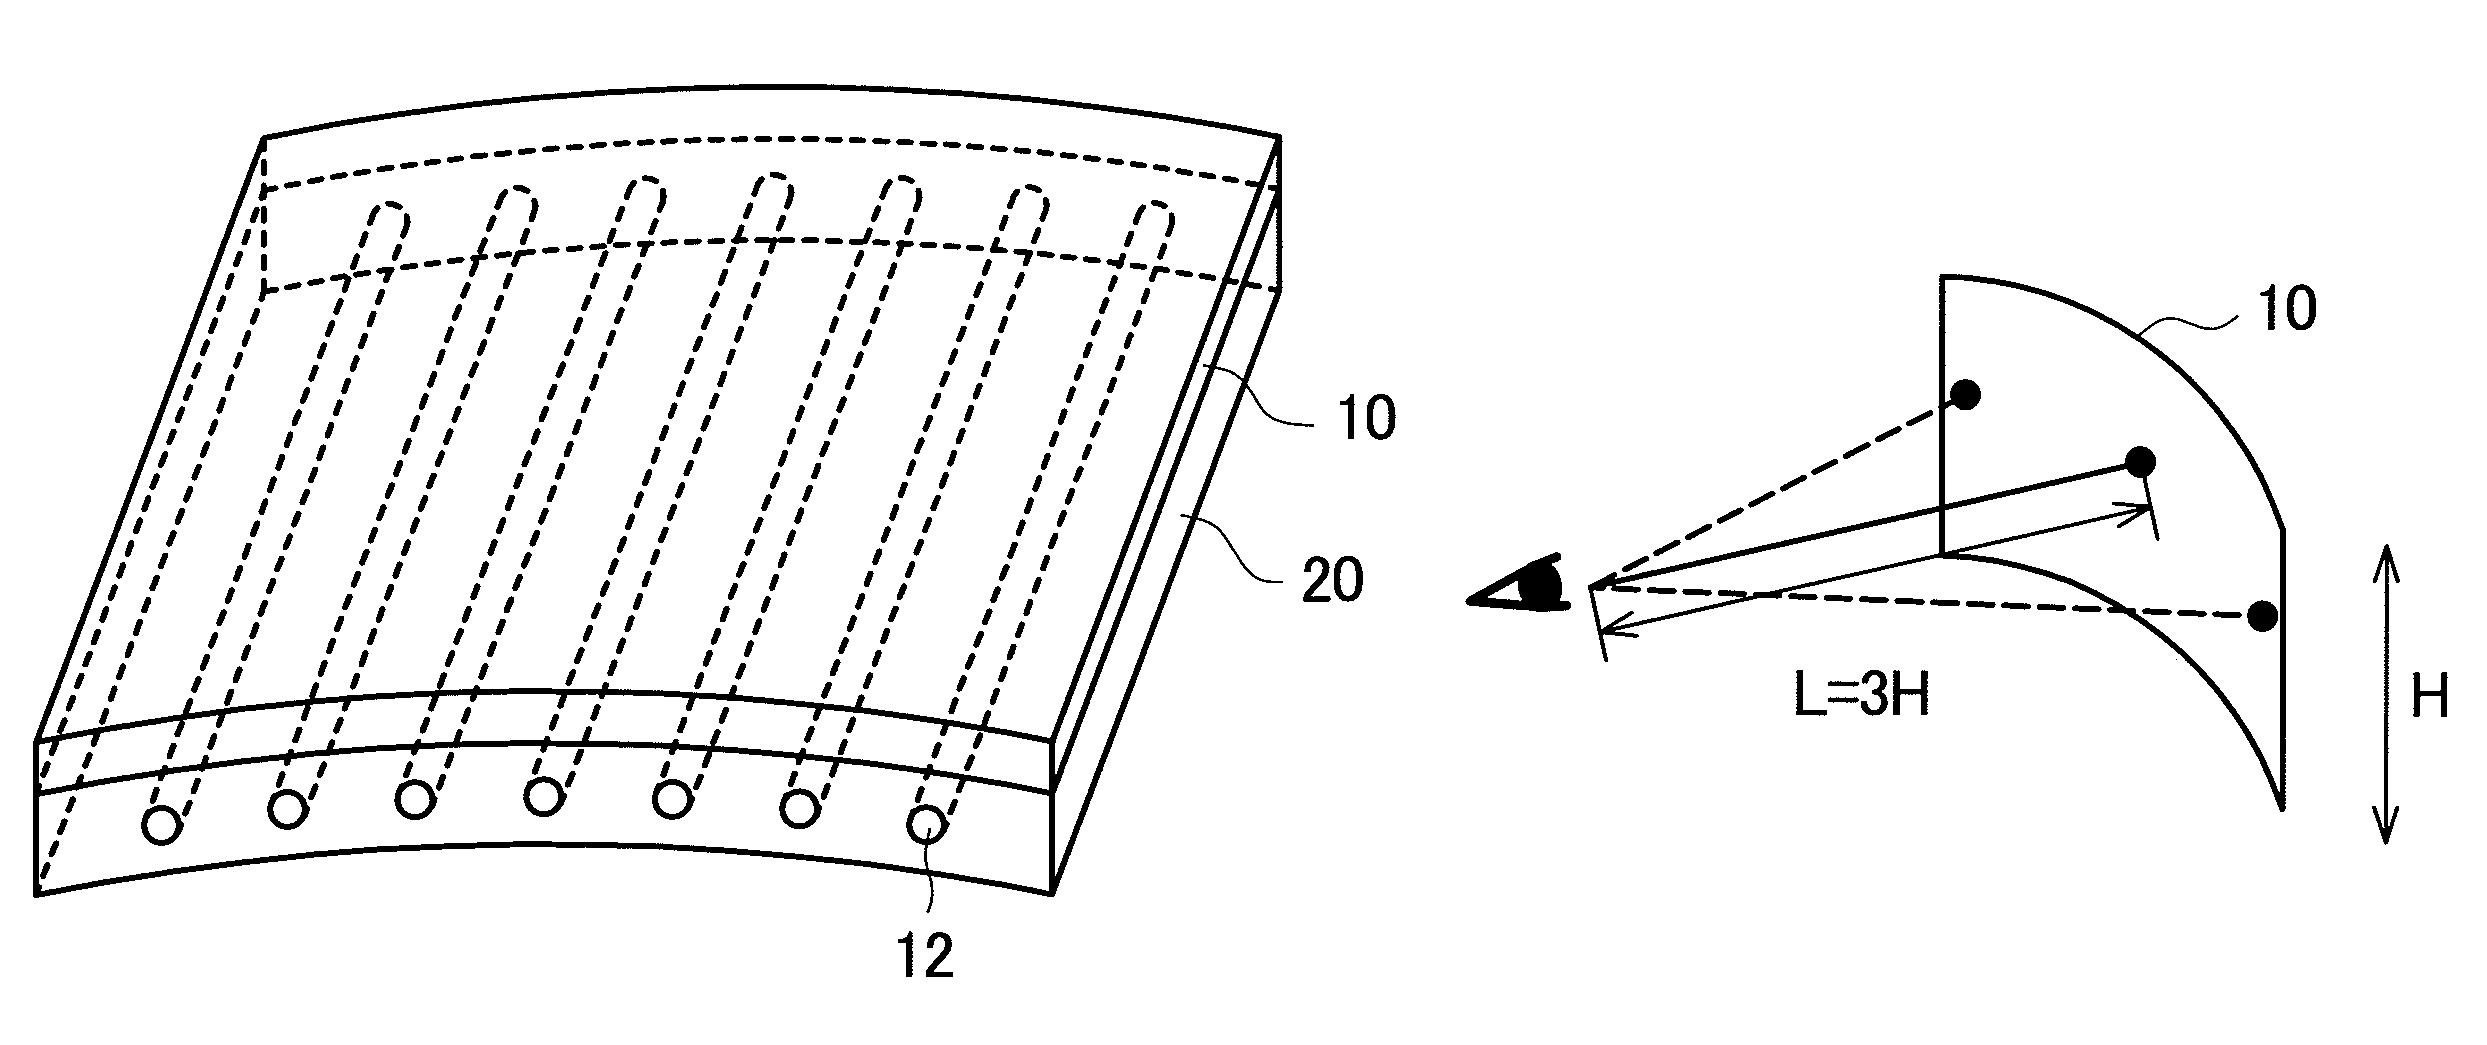 LCD device with plural fluorescent tube backlight for a rectangular curved display surface of a radius of from two to four times as large as the length of the short-side of the rectangular display region